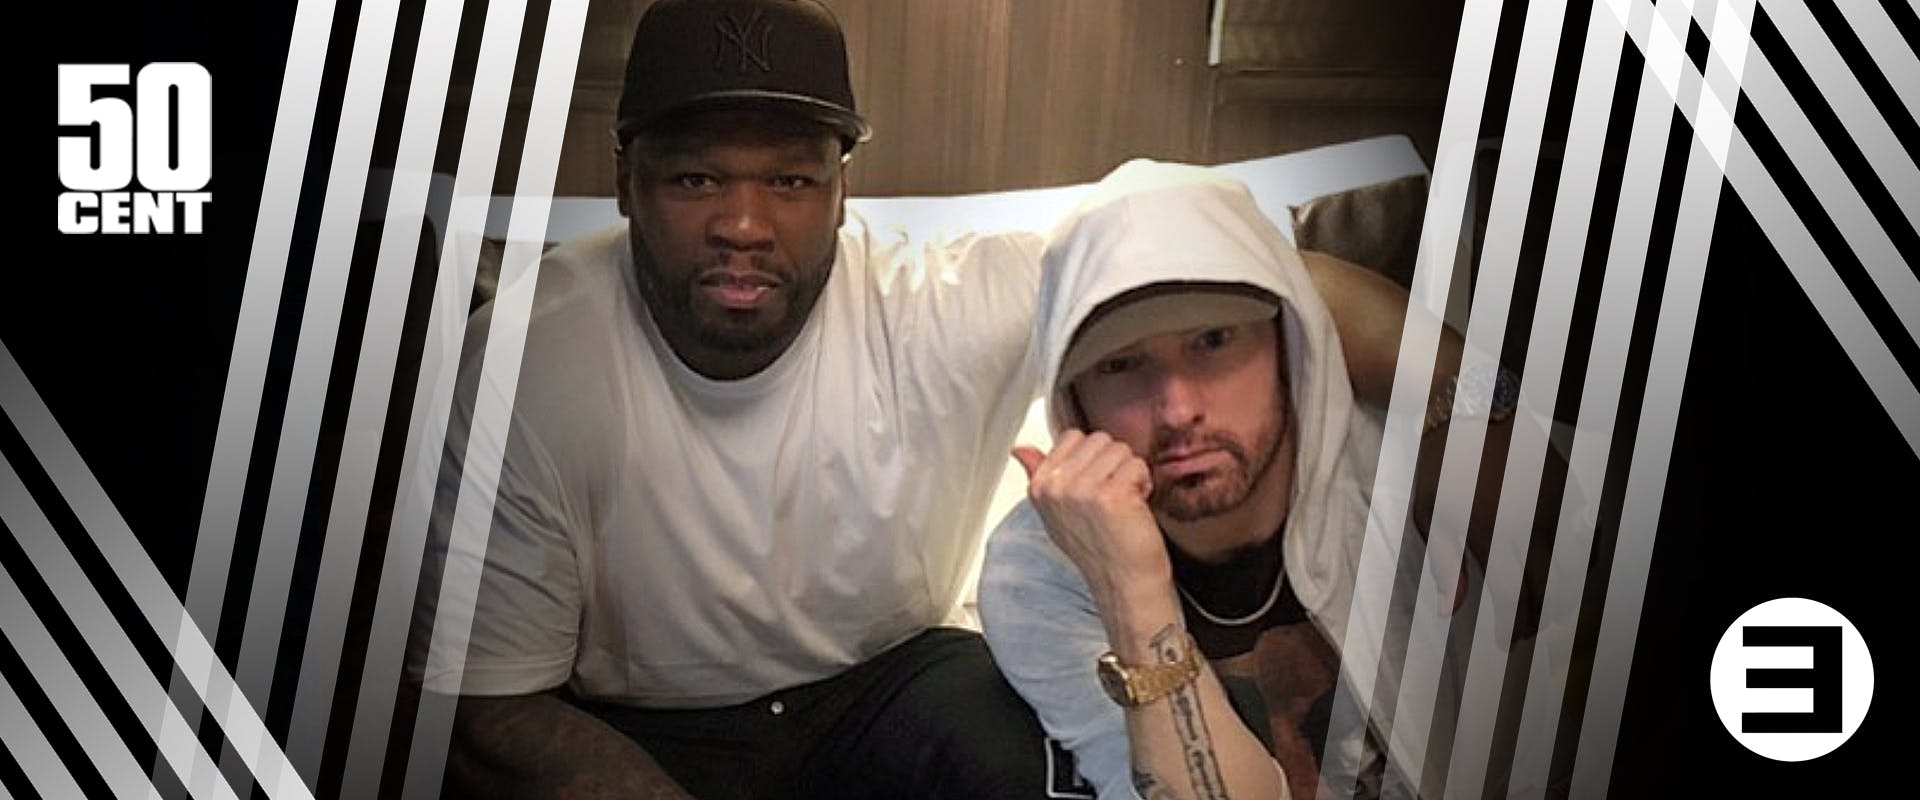 50 Cent Says Em Inspired Him to Write Raps